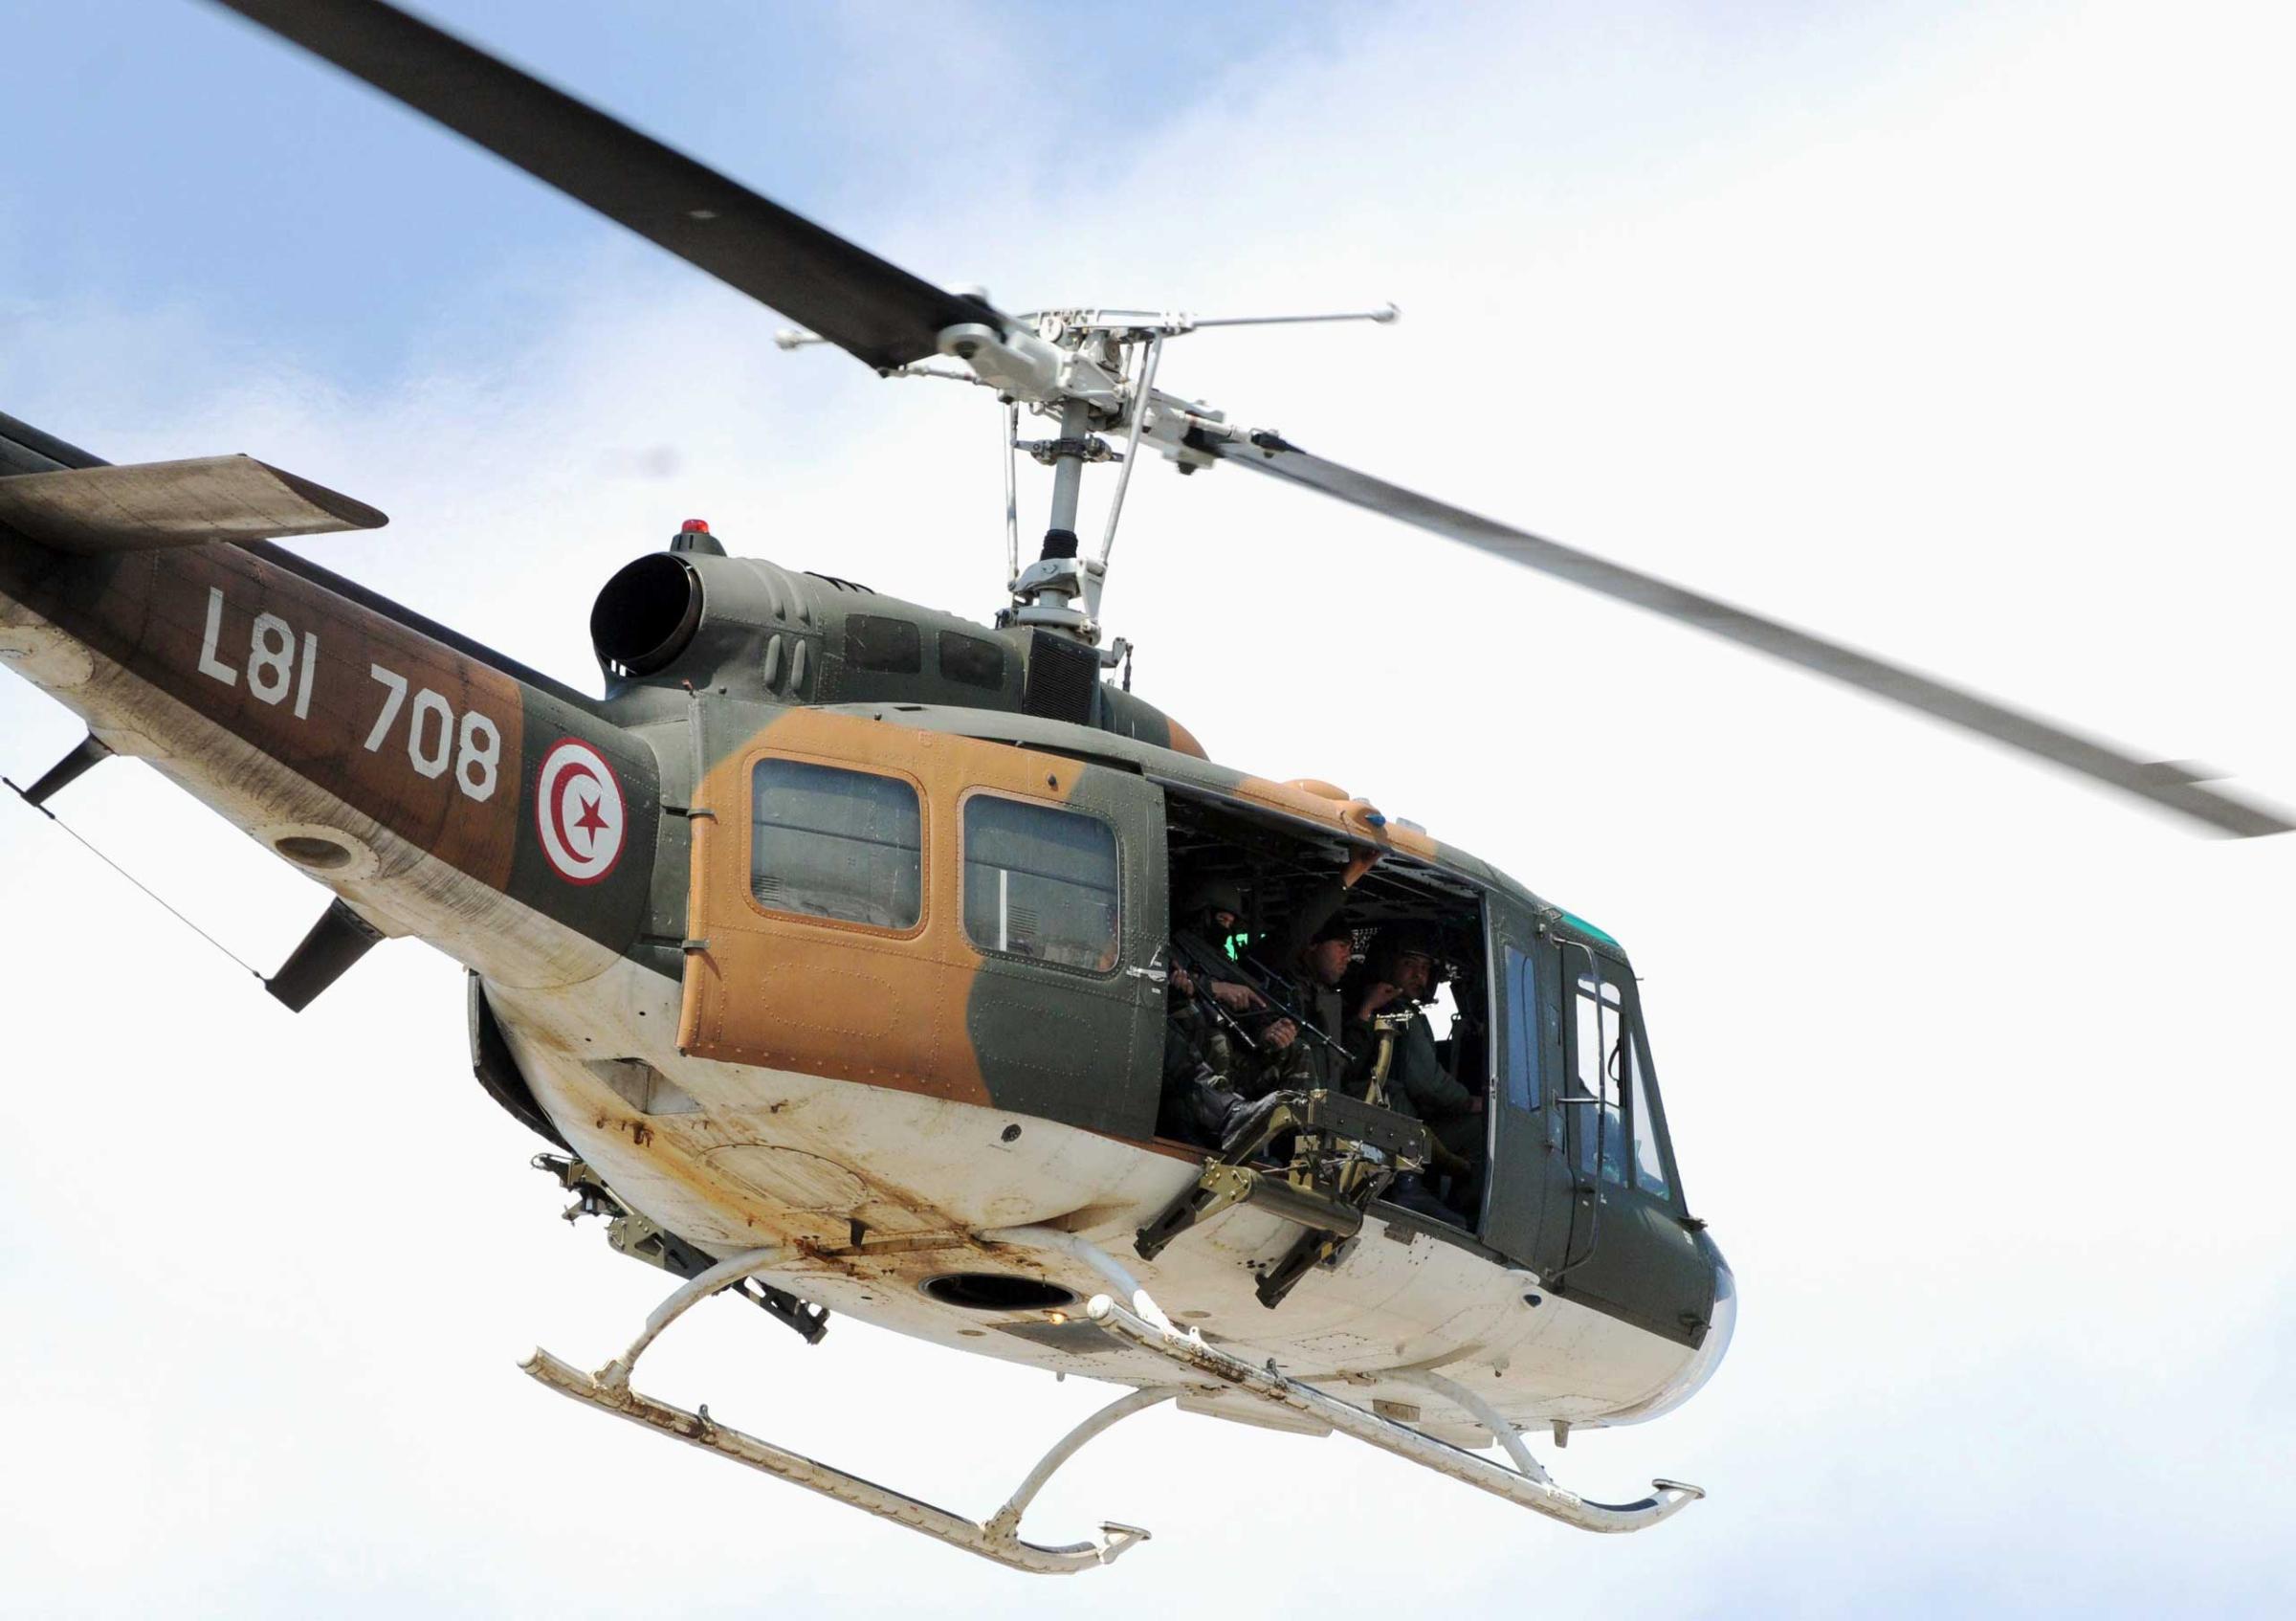 A Tunisian security force helicopter flies over the site of an attack carried out by two gunmen at the National Bardo Museum on March 18, 2015 in Tunis.